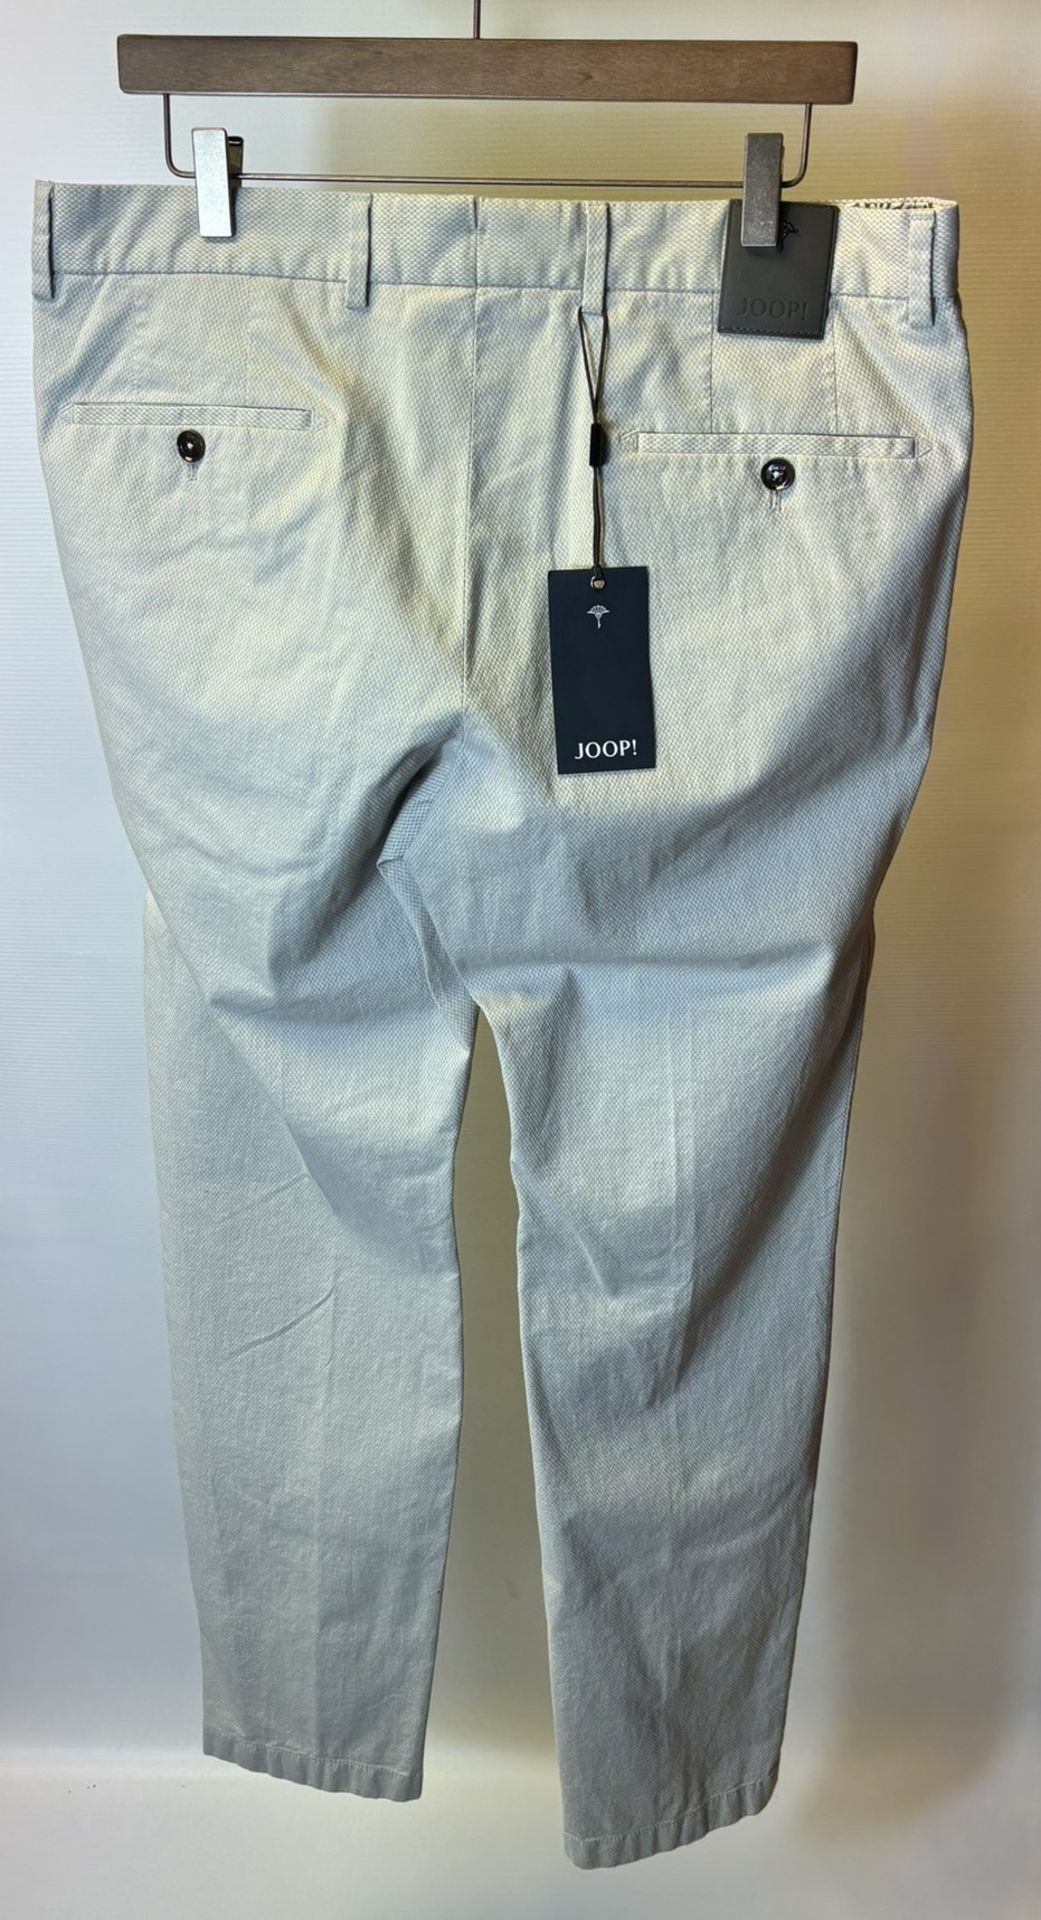 15 x Various Pairs Of Women's Trousers As Seen In Photos - Image 11 of 45